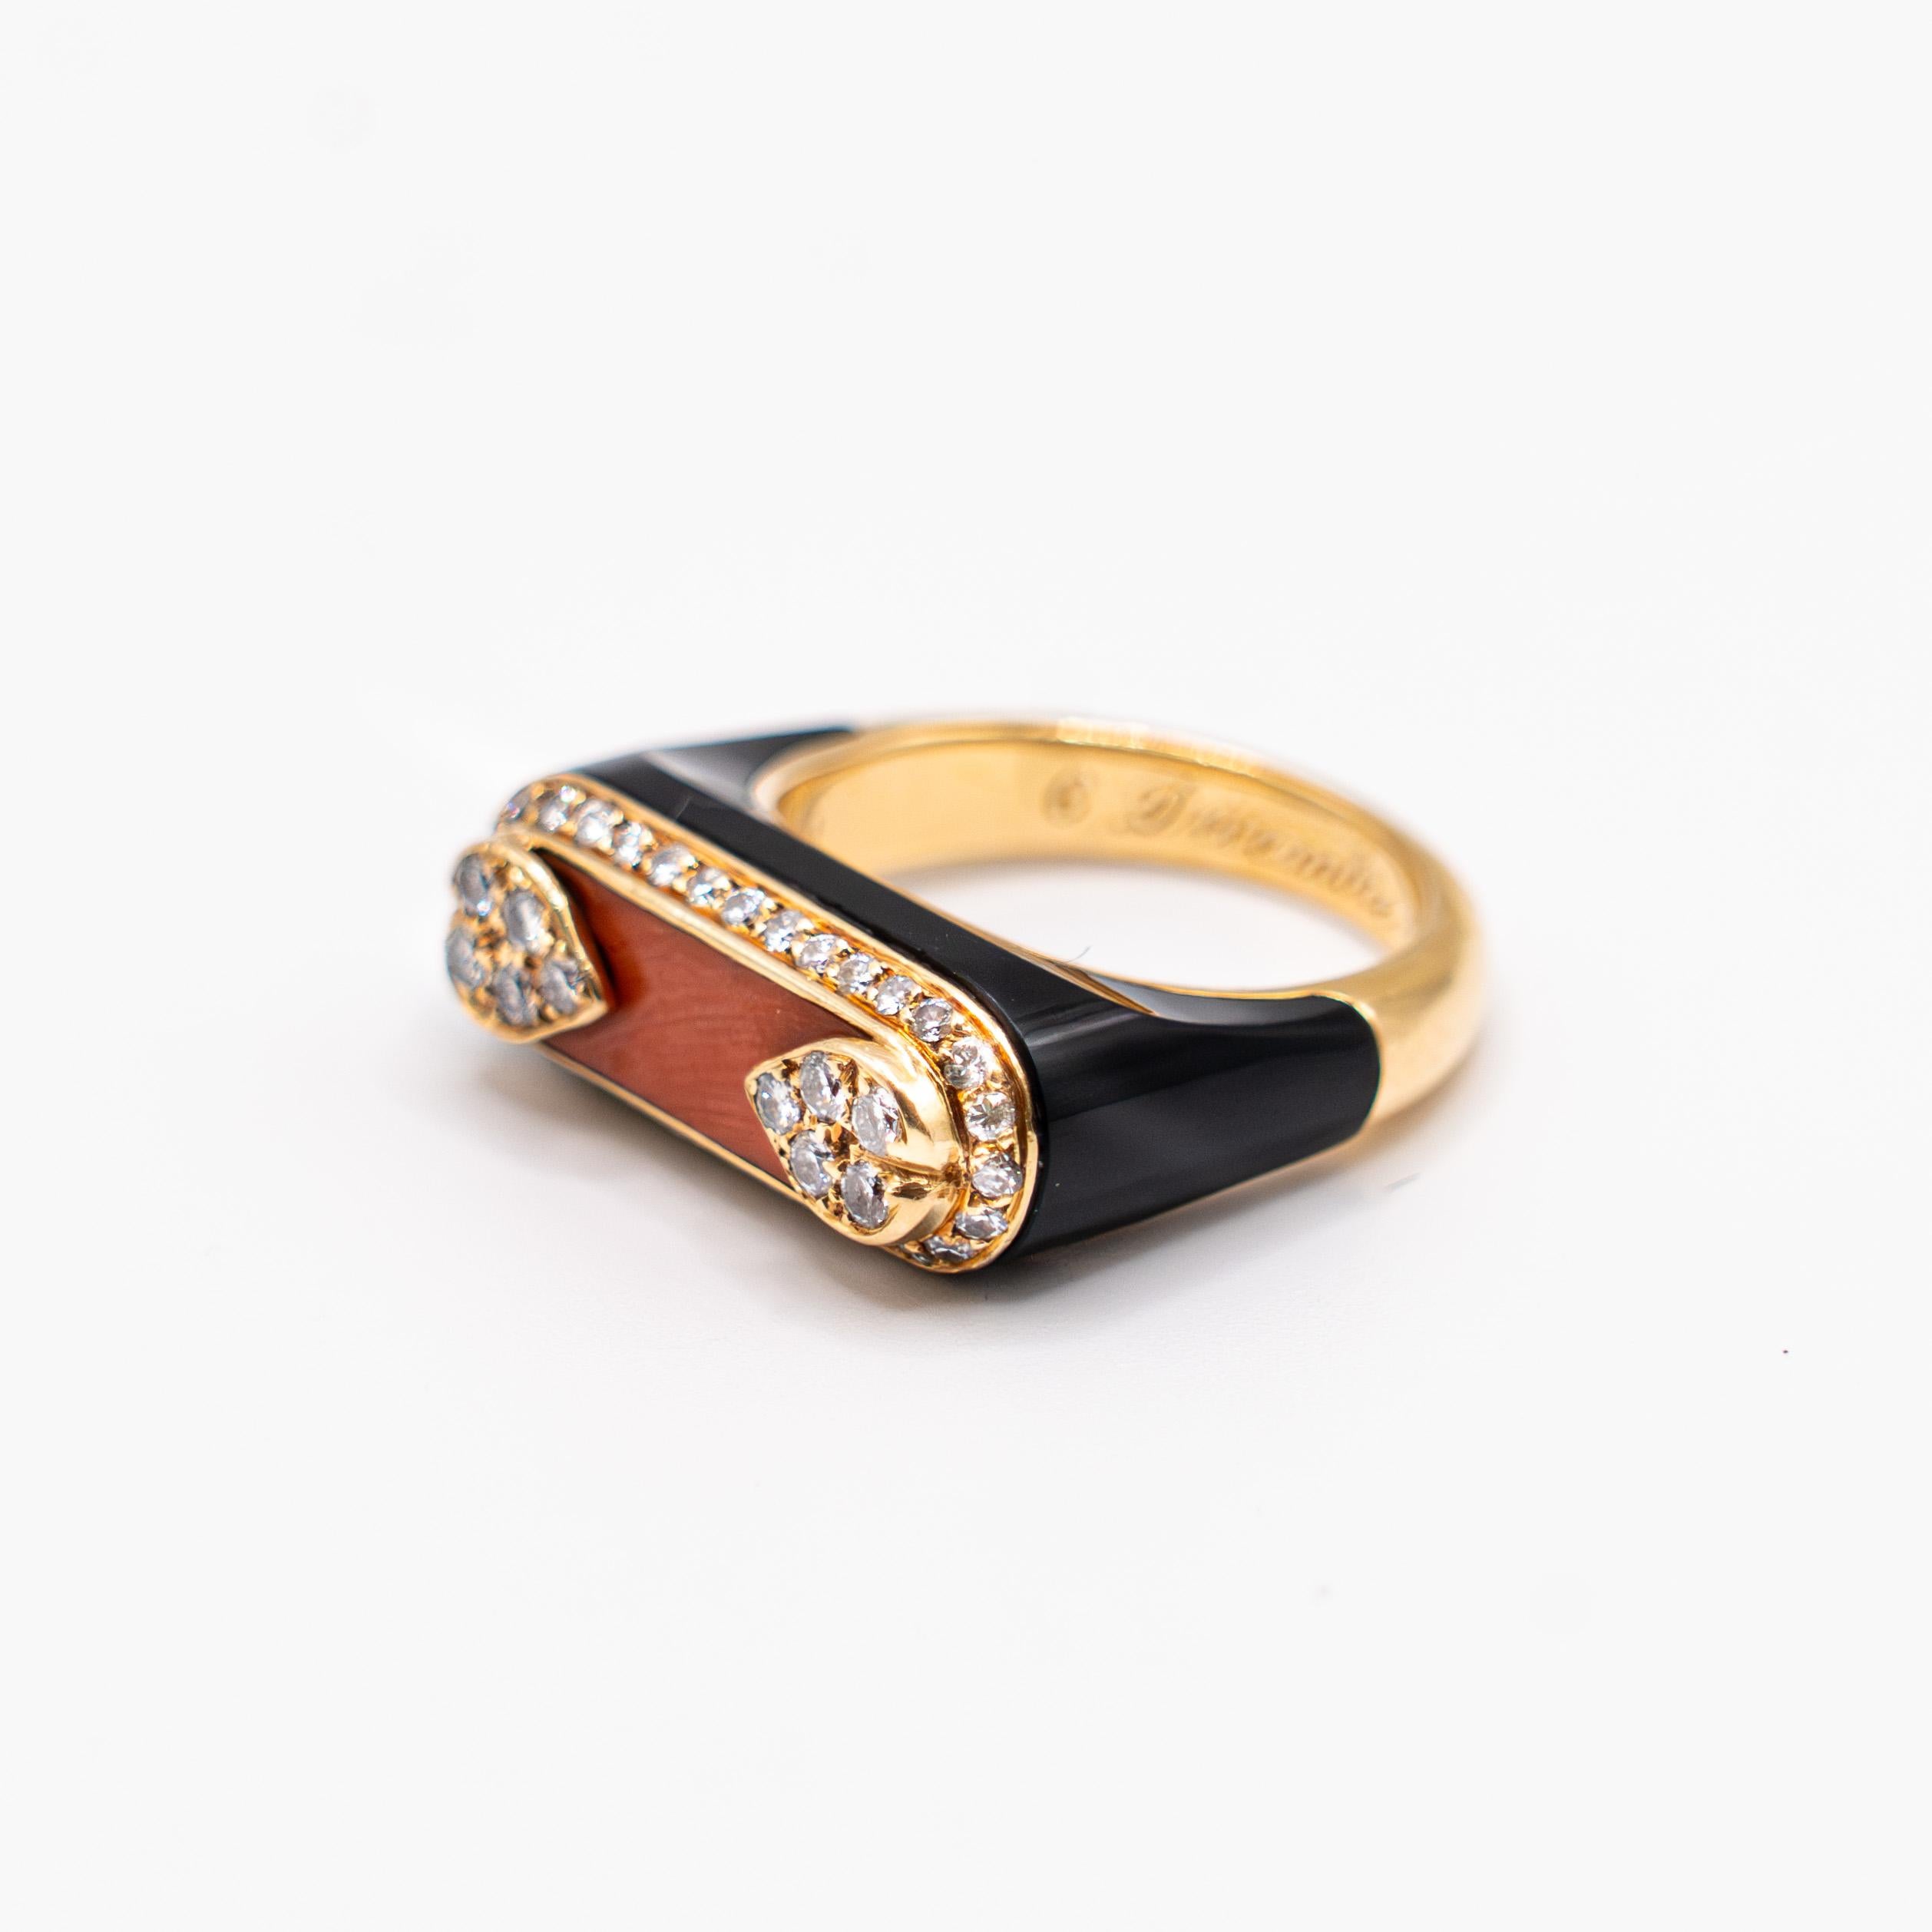 Modernist Cartier Coral Diamonds Onyx Ring